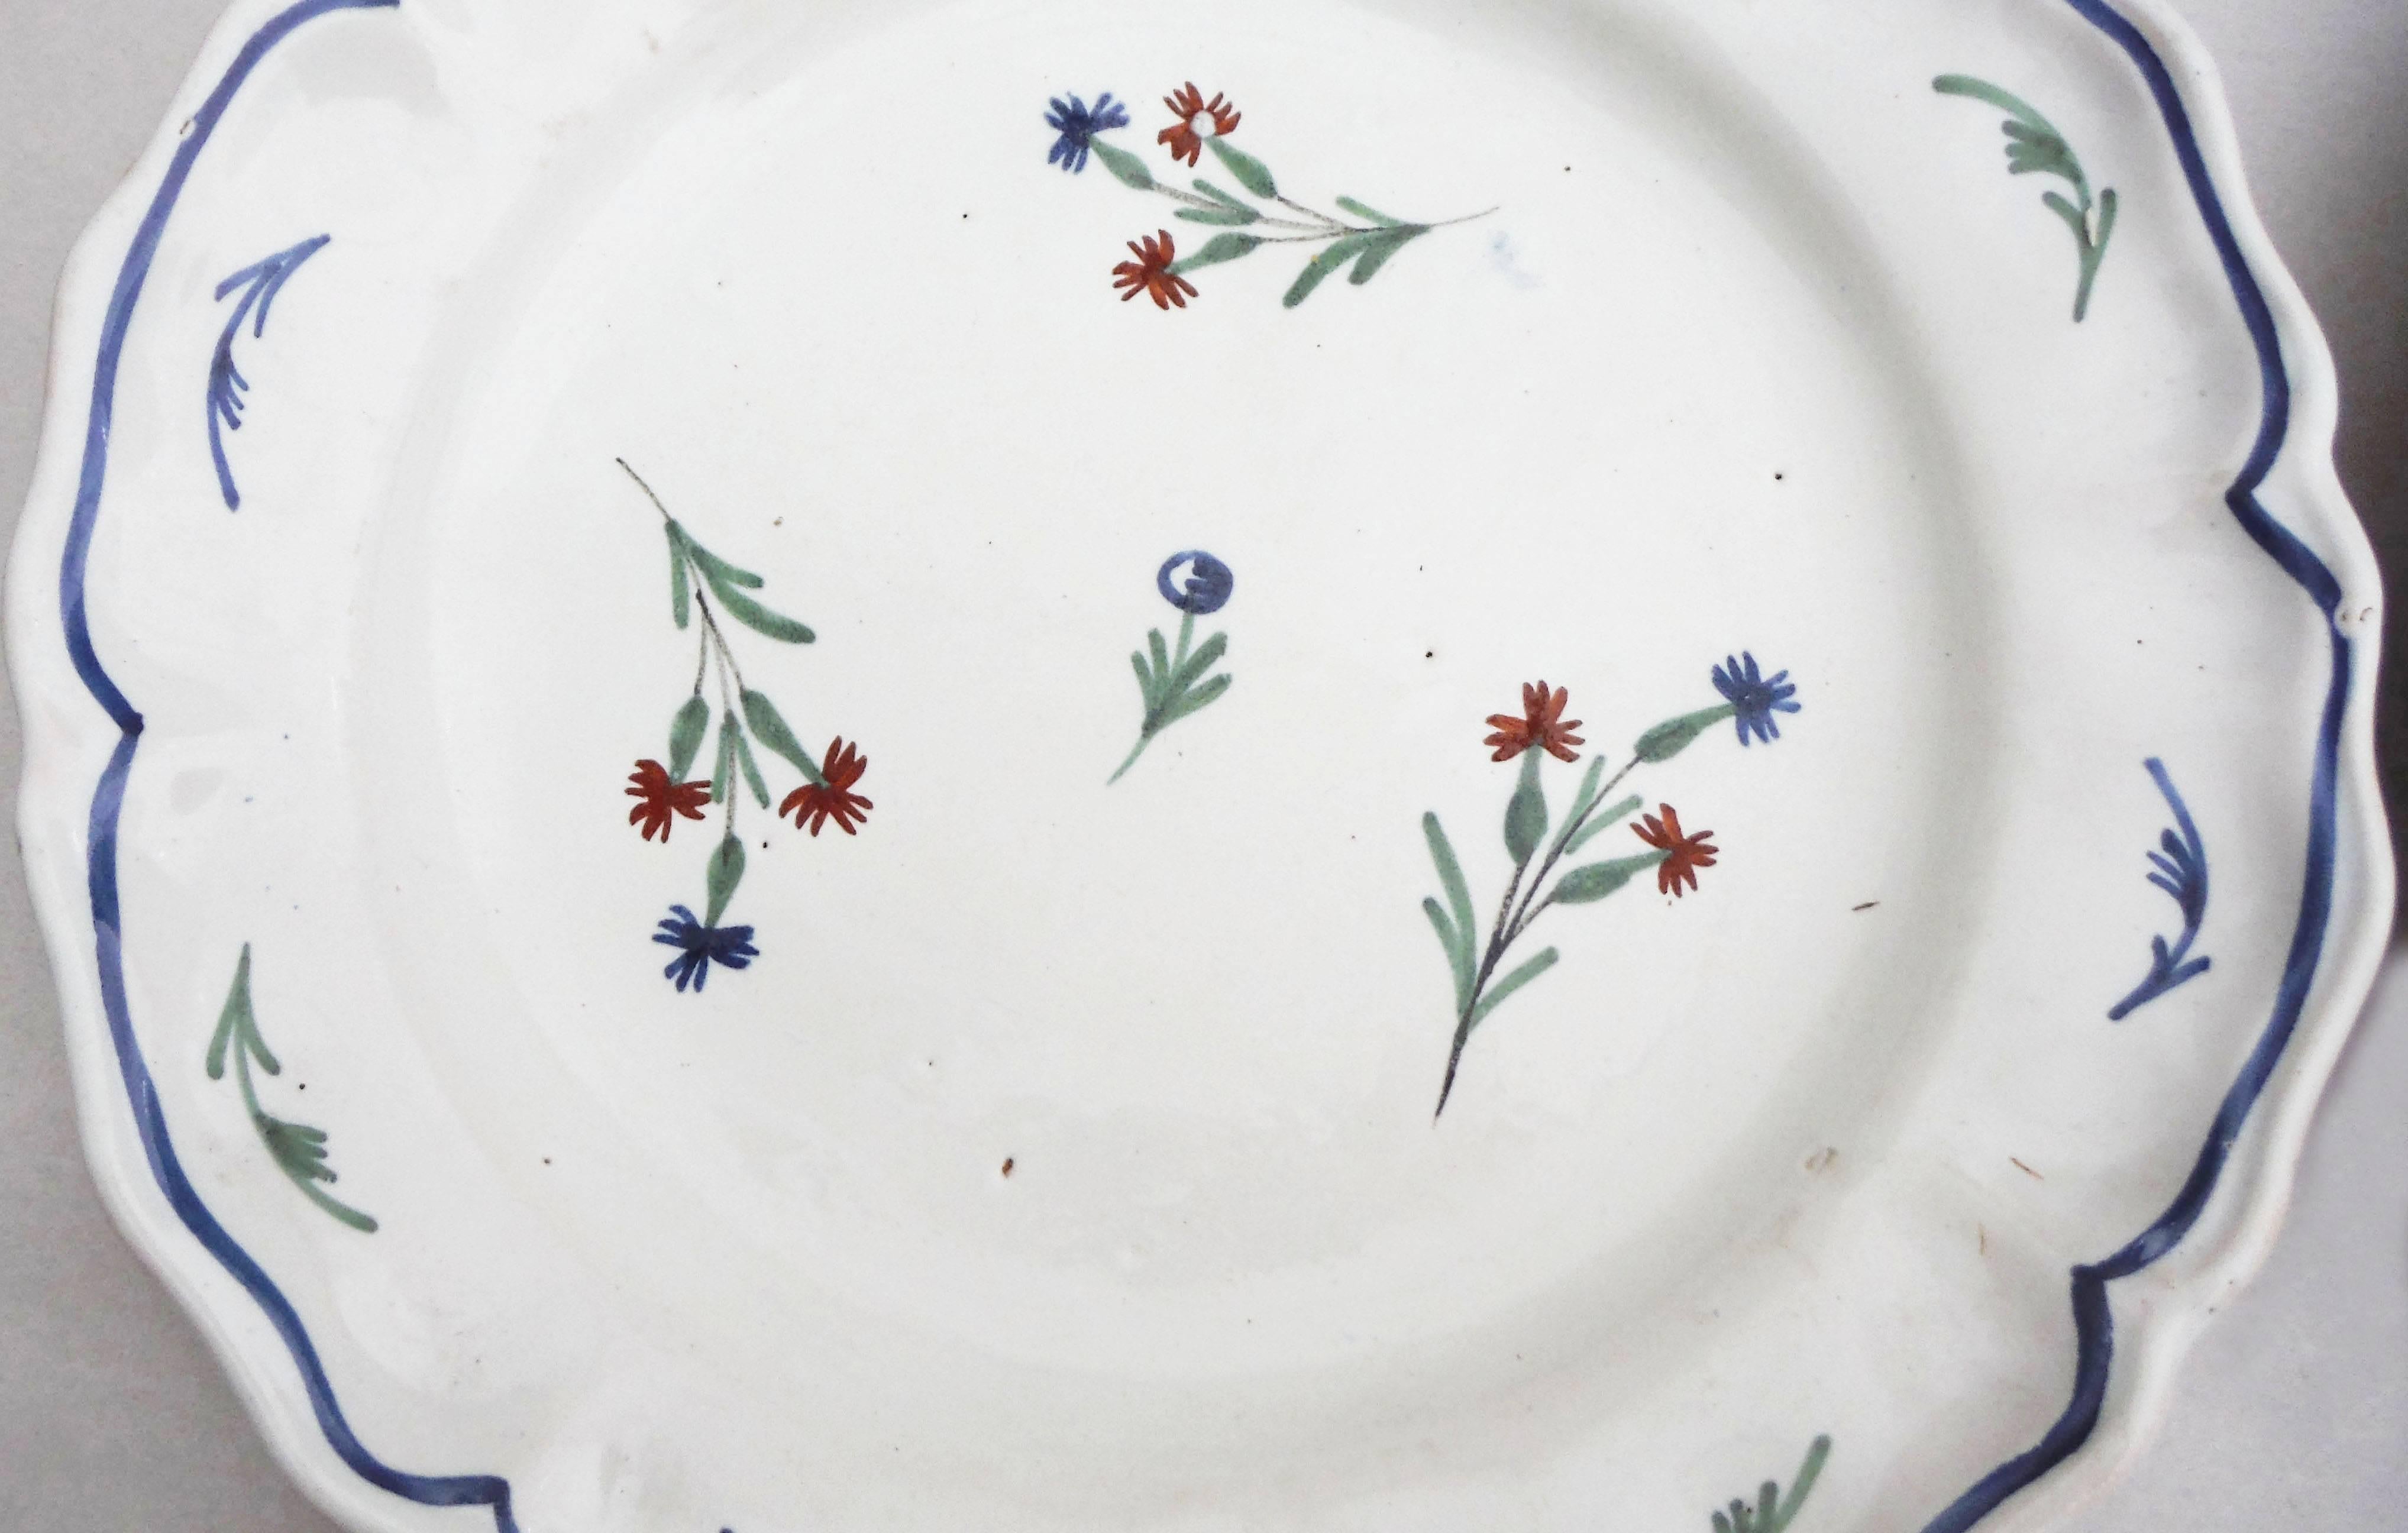 Pair of 19th century French faience plates with wild flowers, a very delicate decoration in a great conditions.